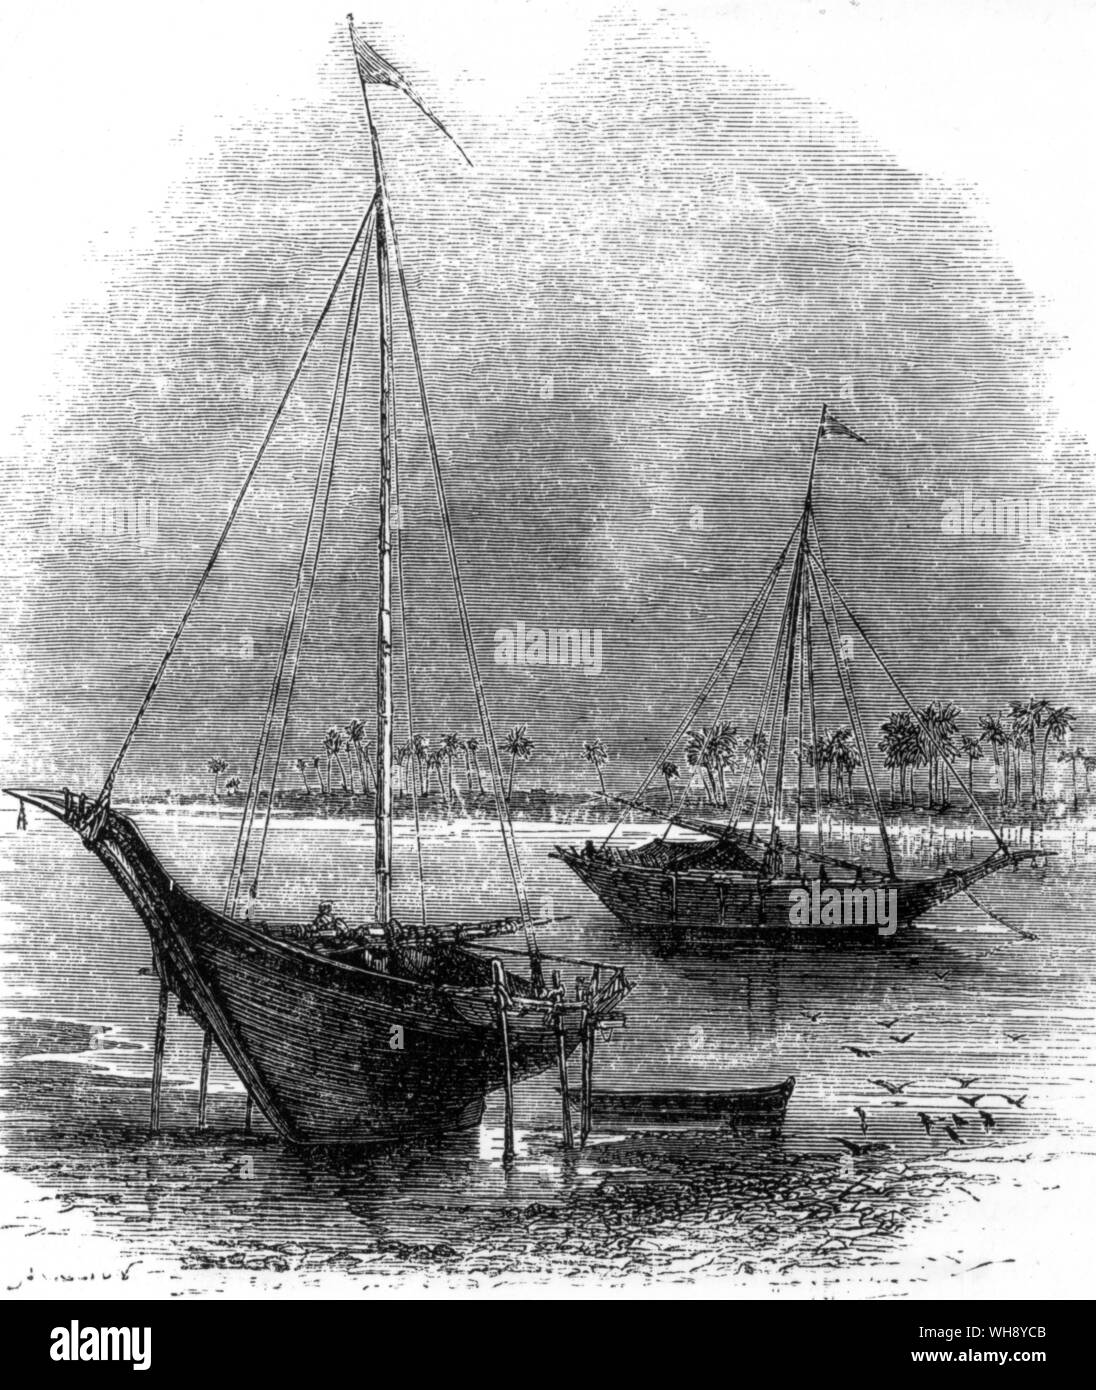 Dhow used for transport of Dr Livingstone's camels. 'Dr Livingstone, though no artist, had acquired a practice of making rude sketches of scenes and objects which have furnished material for the engravers.' Stock Photo